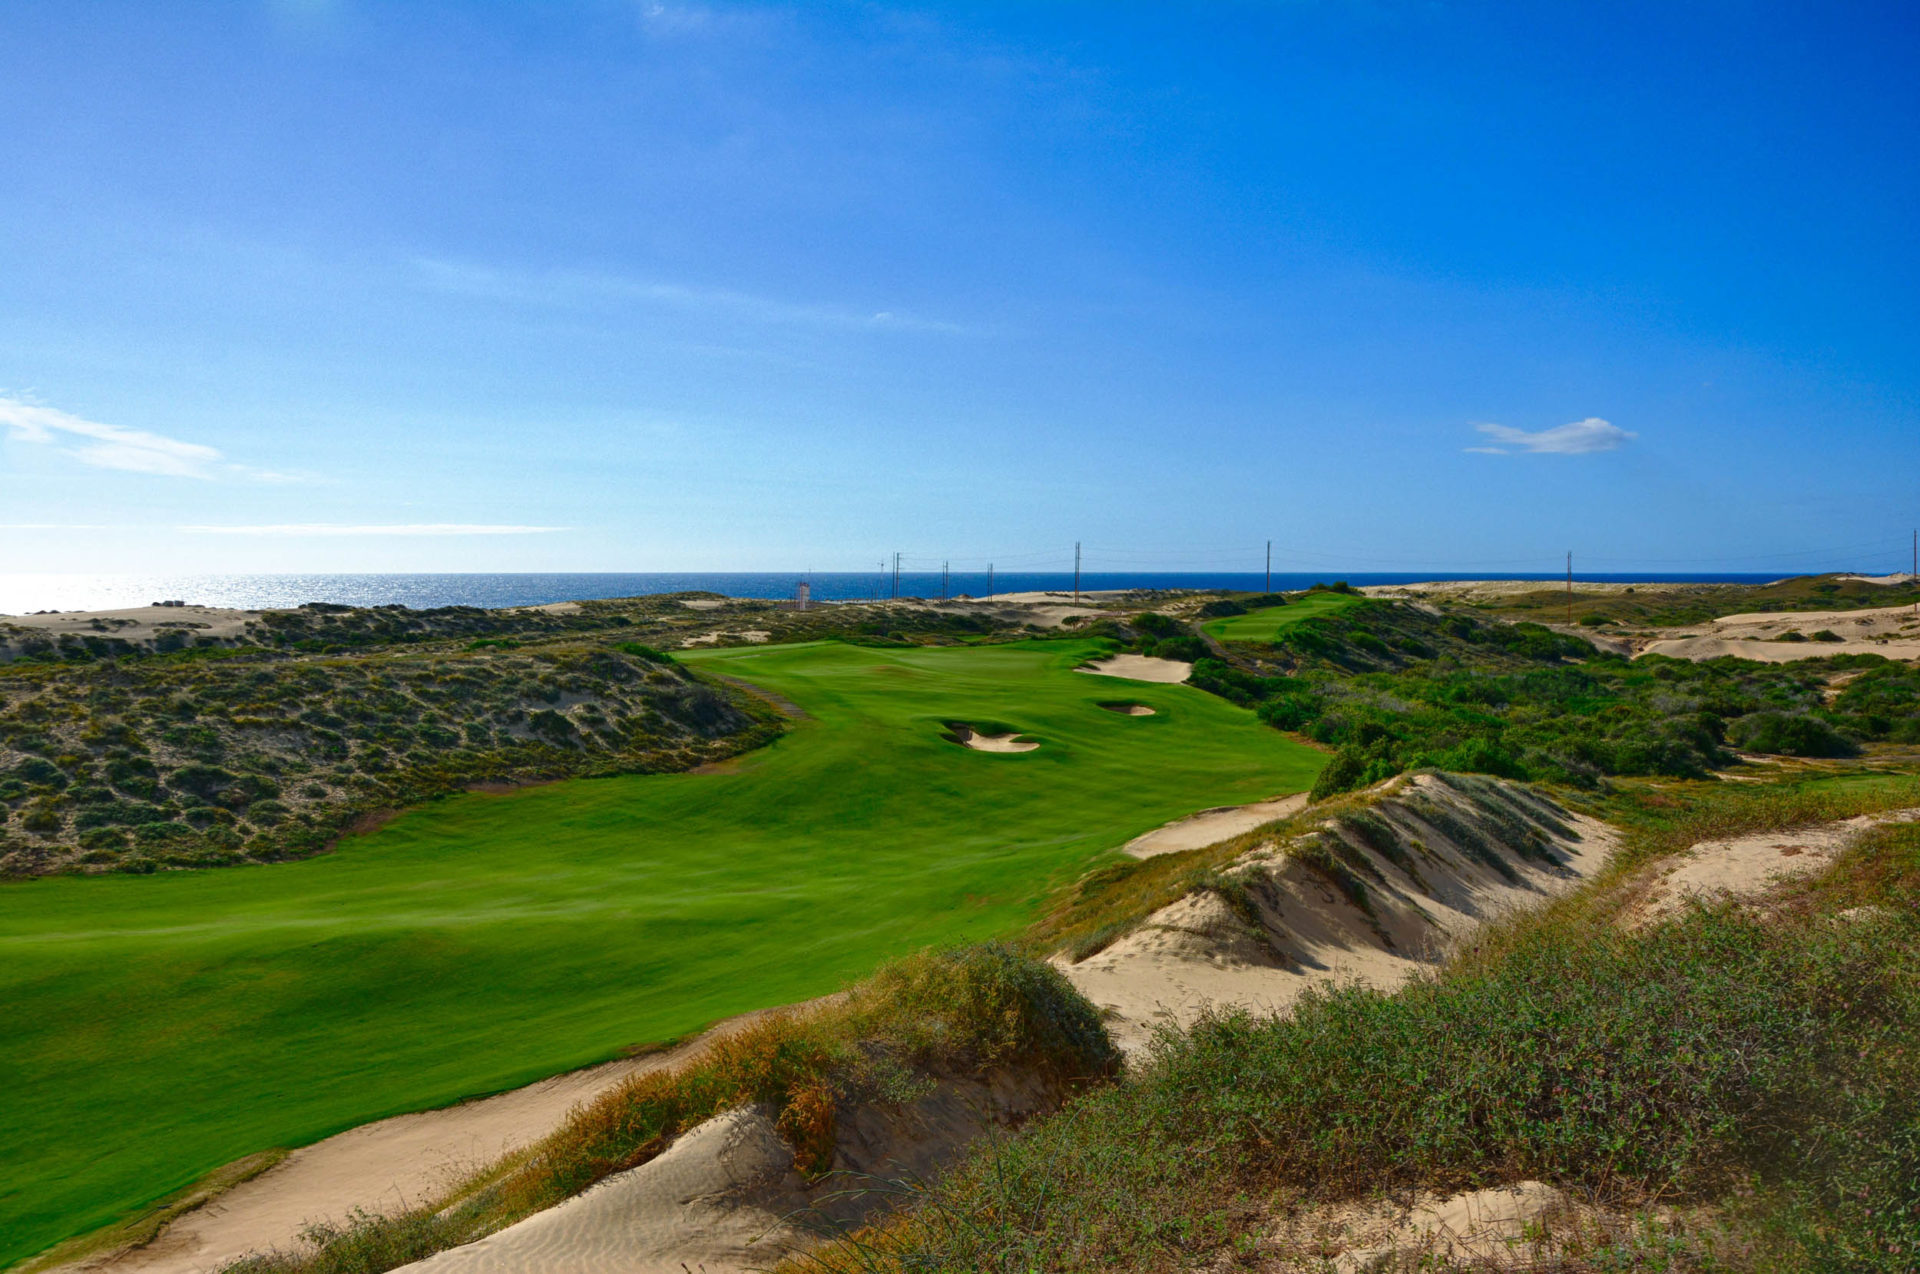 Diamante Cabo: Is the Dunes Course the Best Course in Mexico?